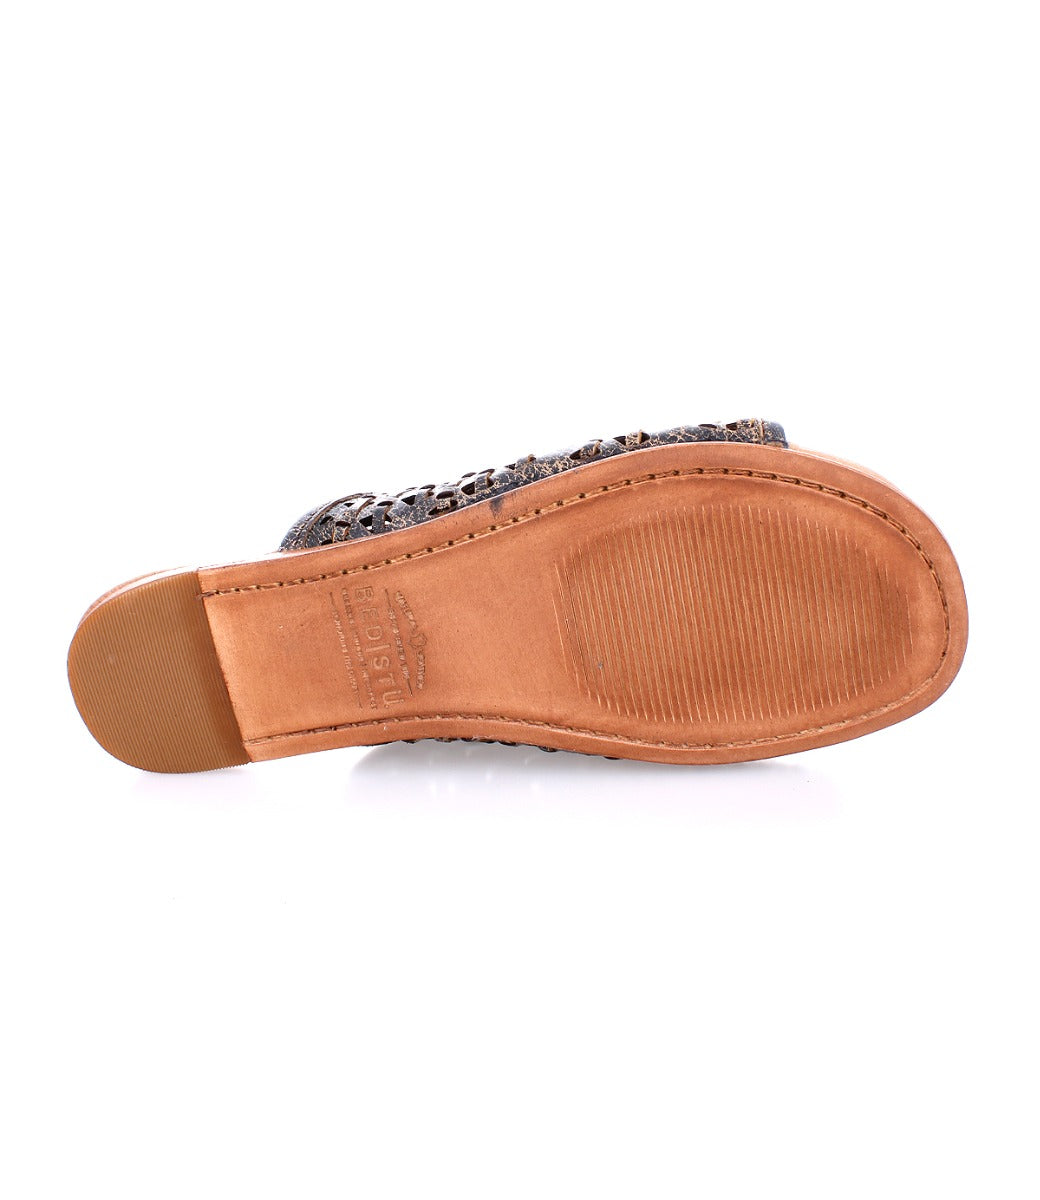 A pair of Minerva women's sandals with a brown leather sole by Bed Stu.